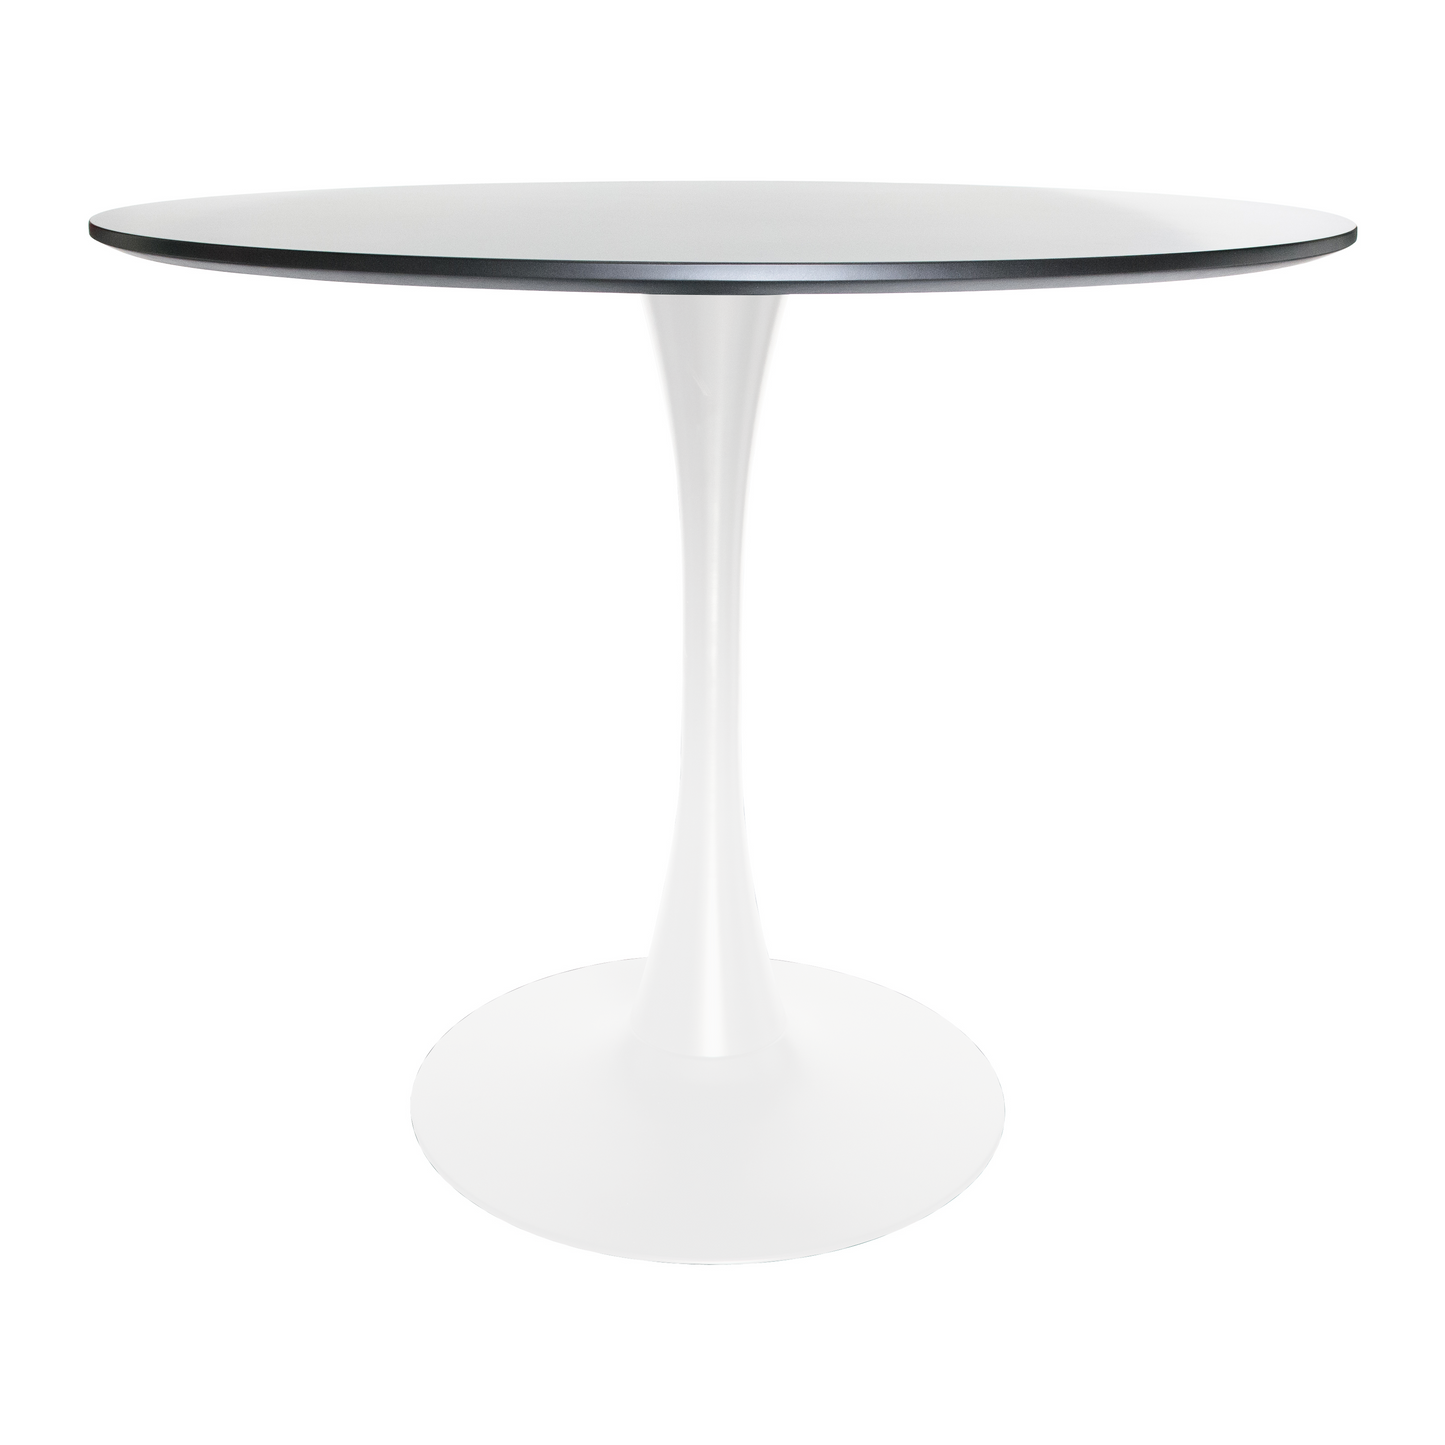 Theodor 36" Round Dining Table - Wood Top